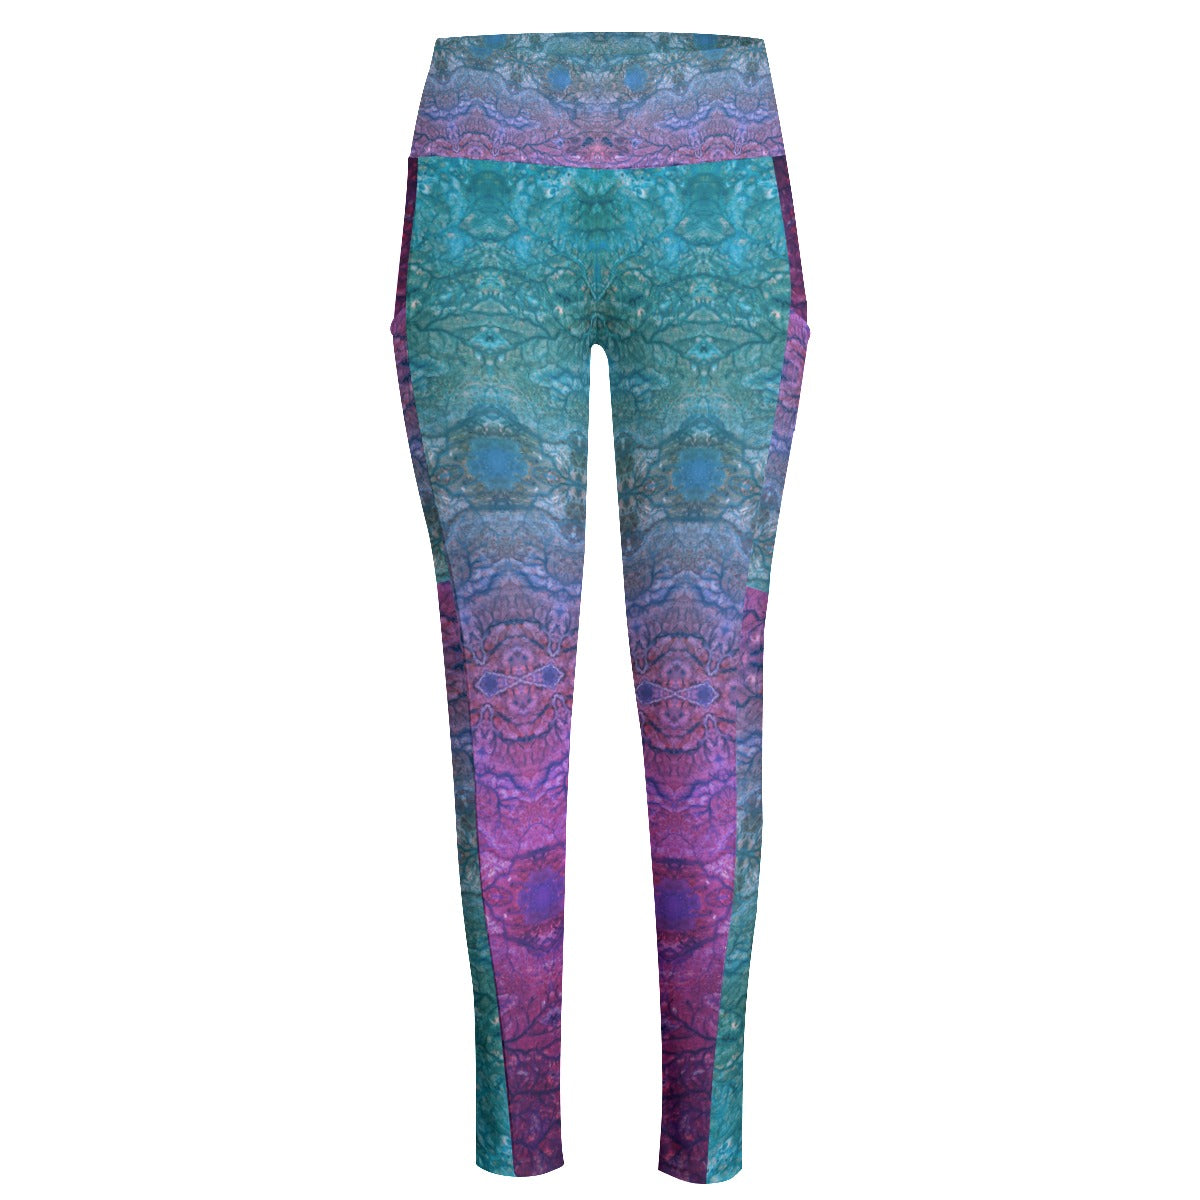 Lotus Roots High Waist Leggings With Side Pockets